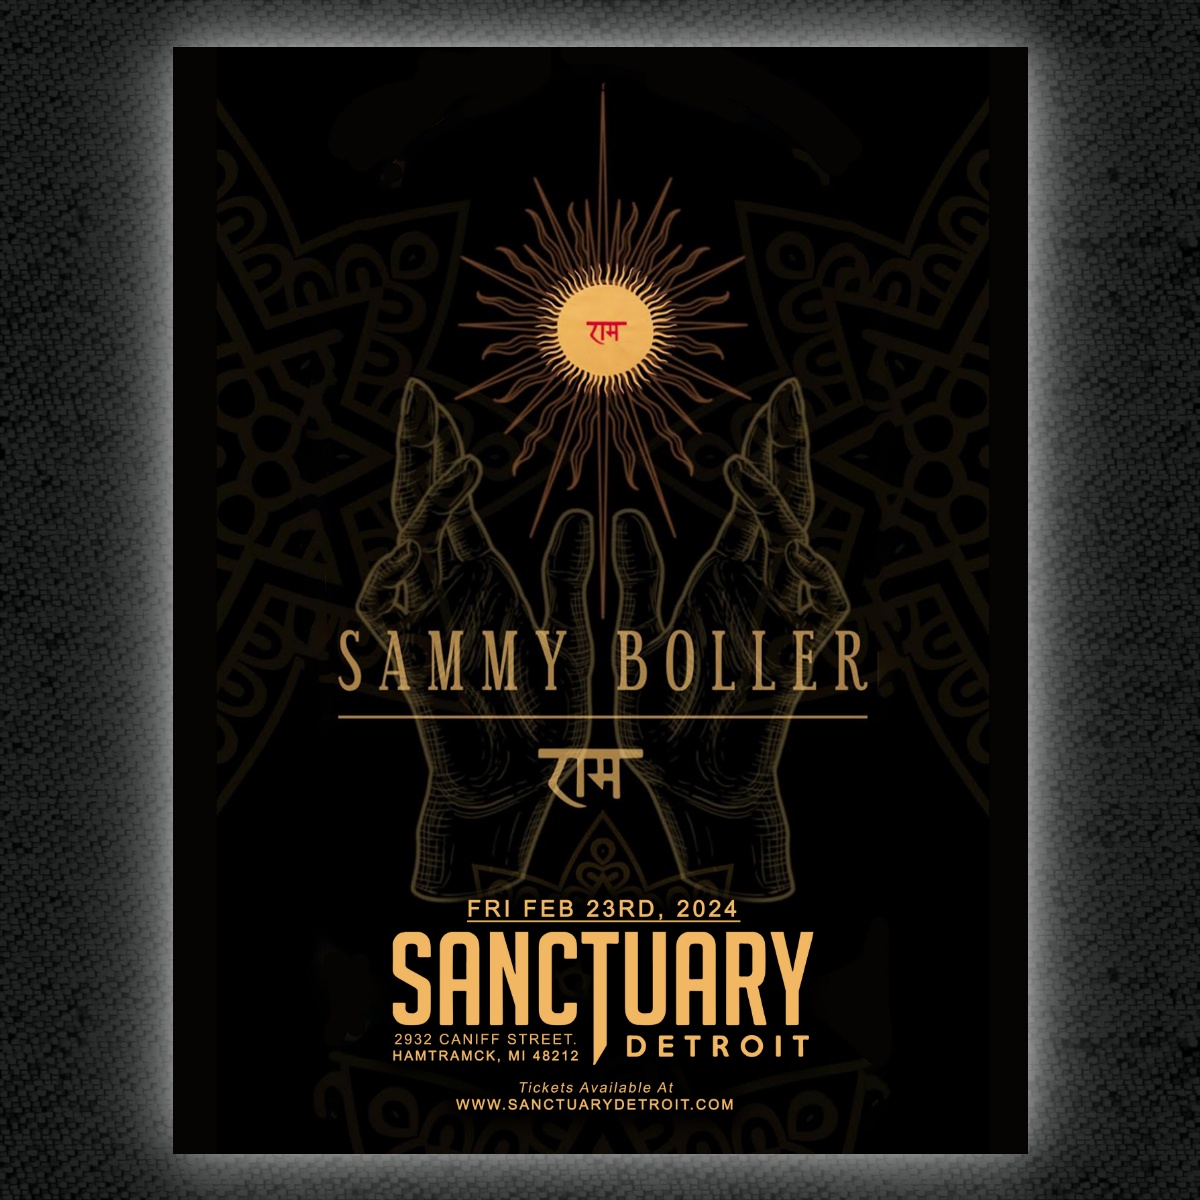 Sammy Boller returns to The Sanctuary 2/23 !! Tickets are on sale NOW at sanctuarydetroit.com